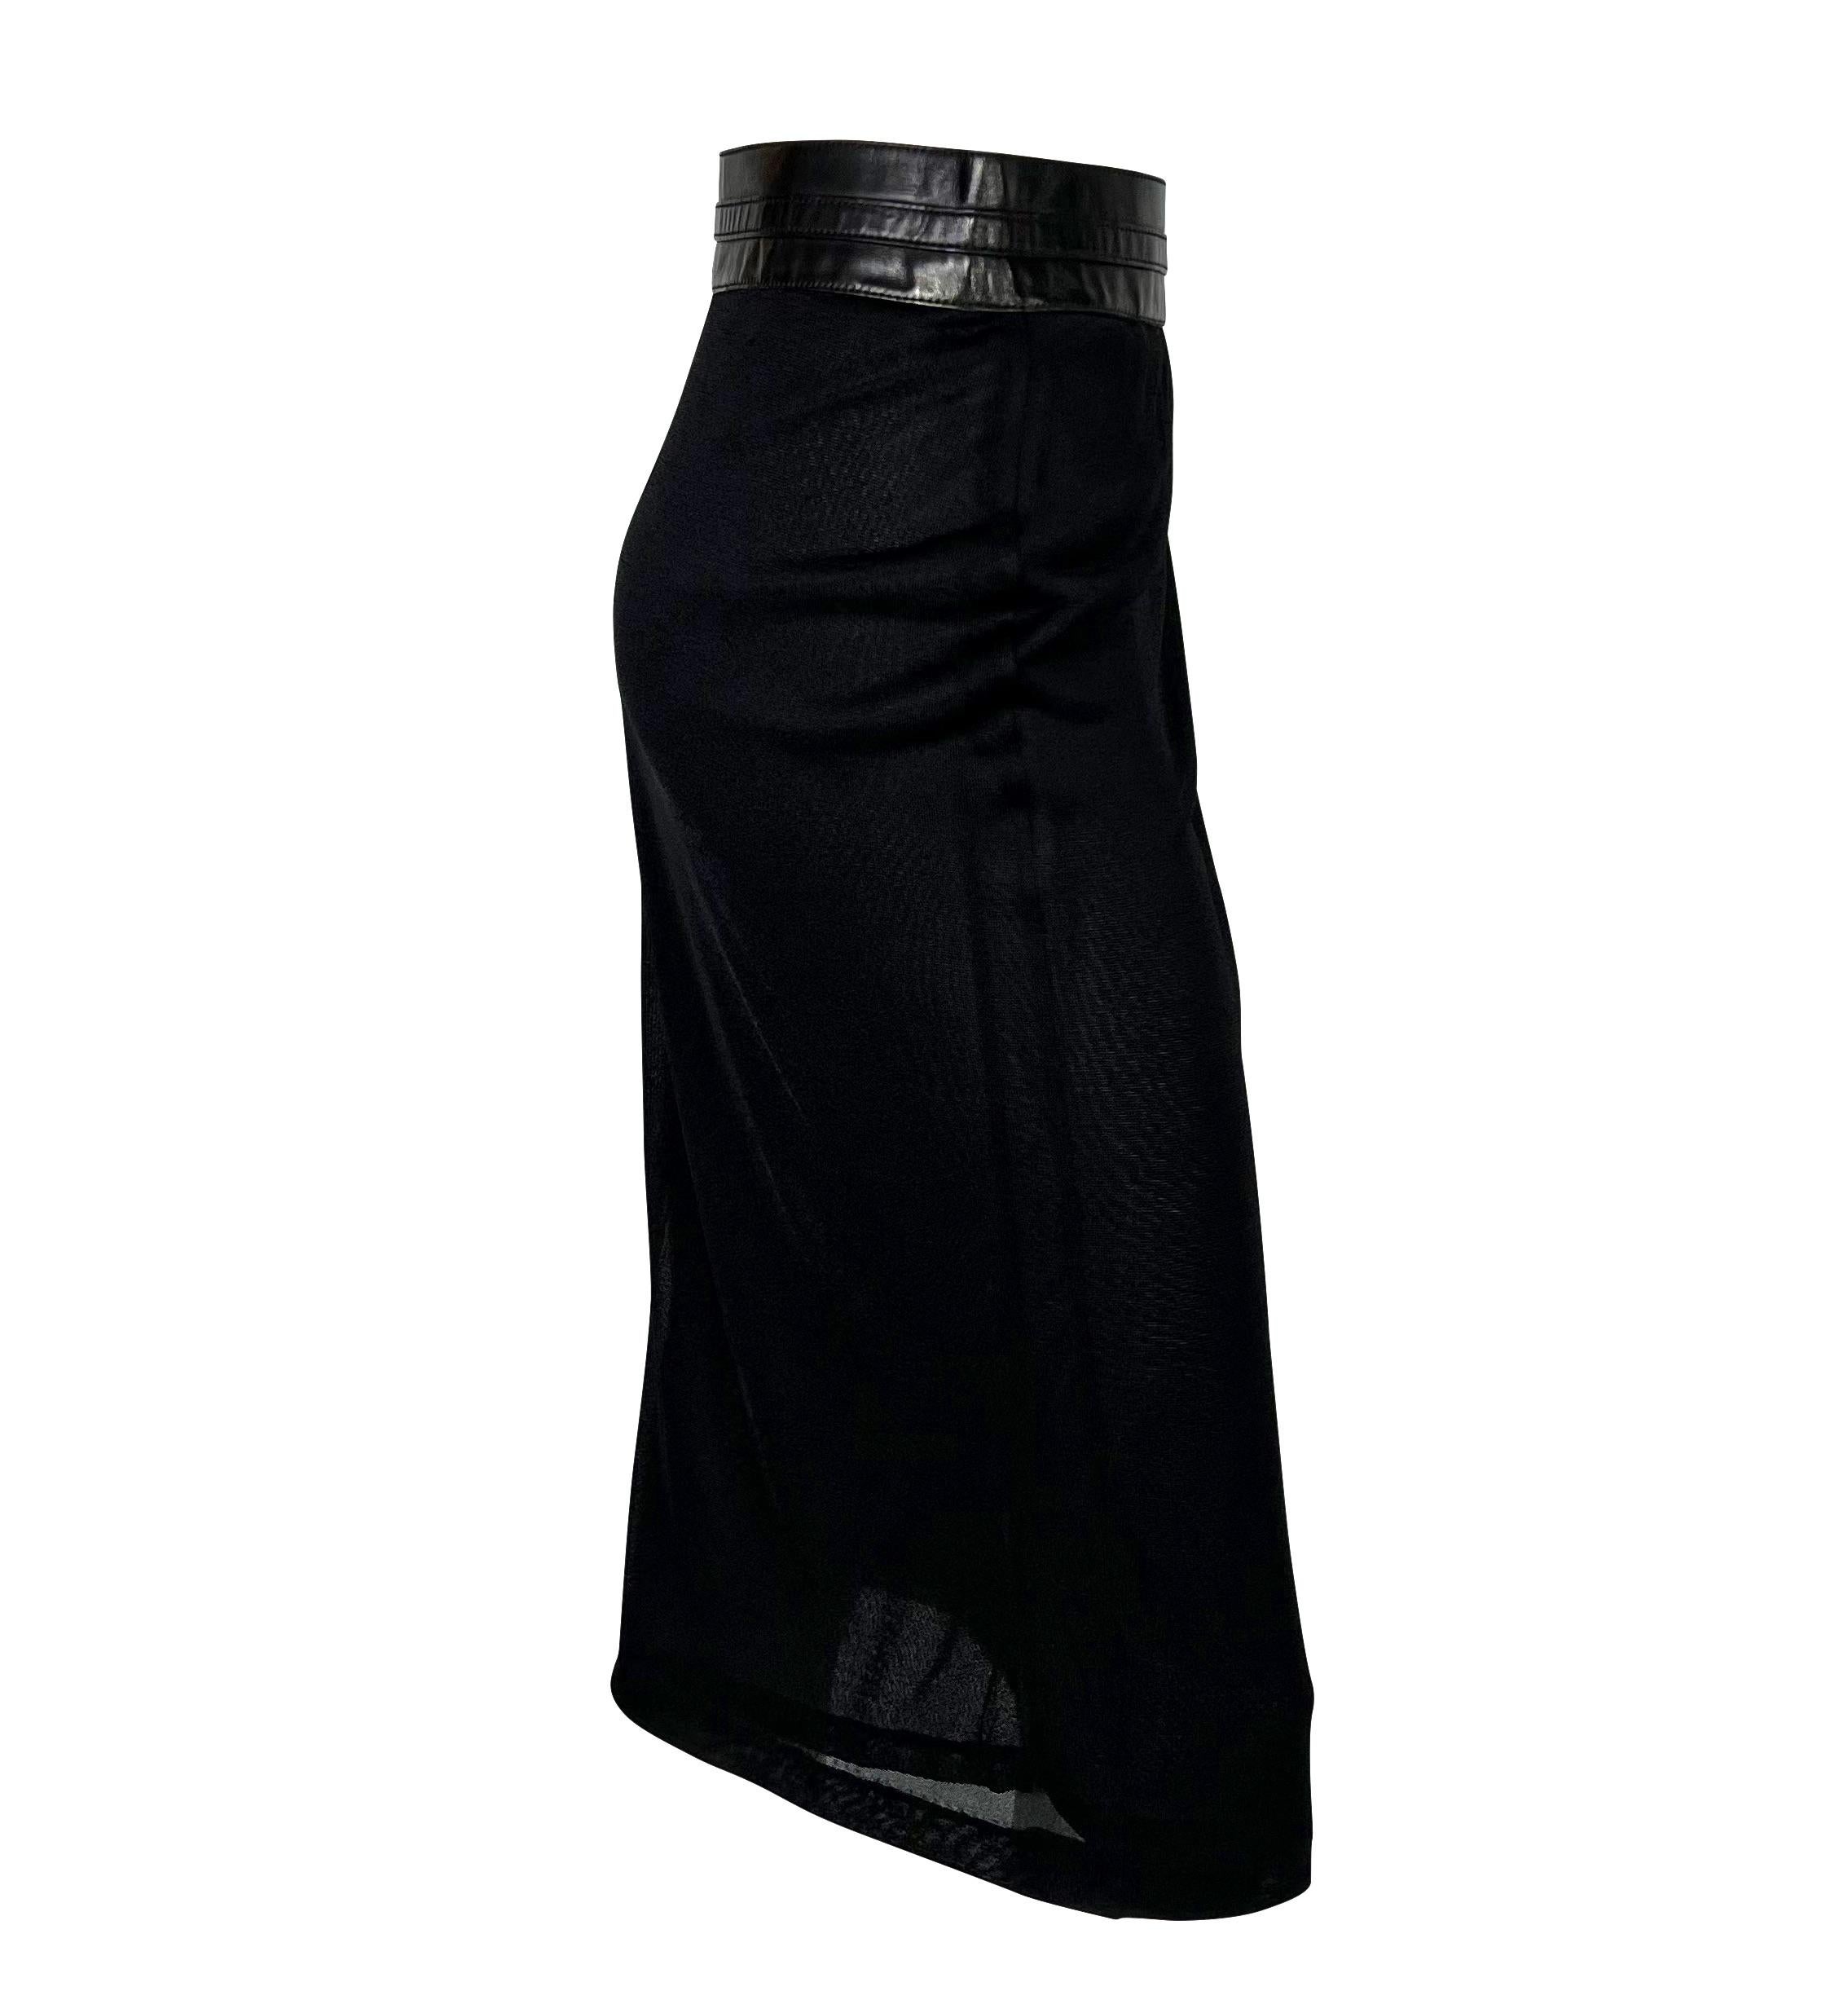 S/S 2001 Gucci by Tom Ford Sheer Black Leather Belted Wrap Skirt For Sale 1